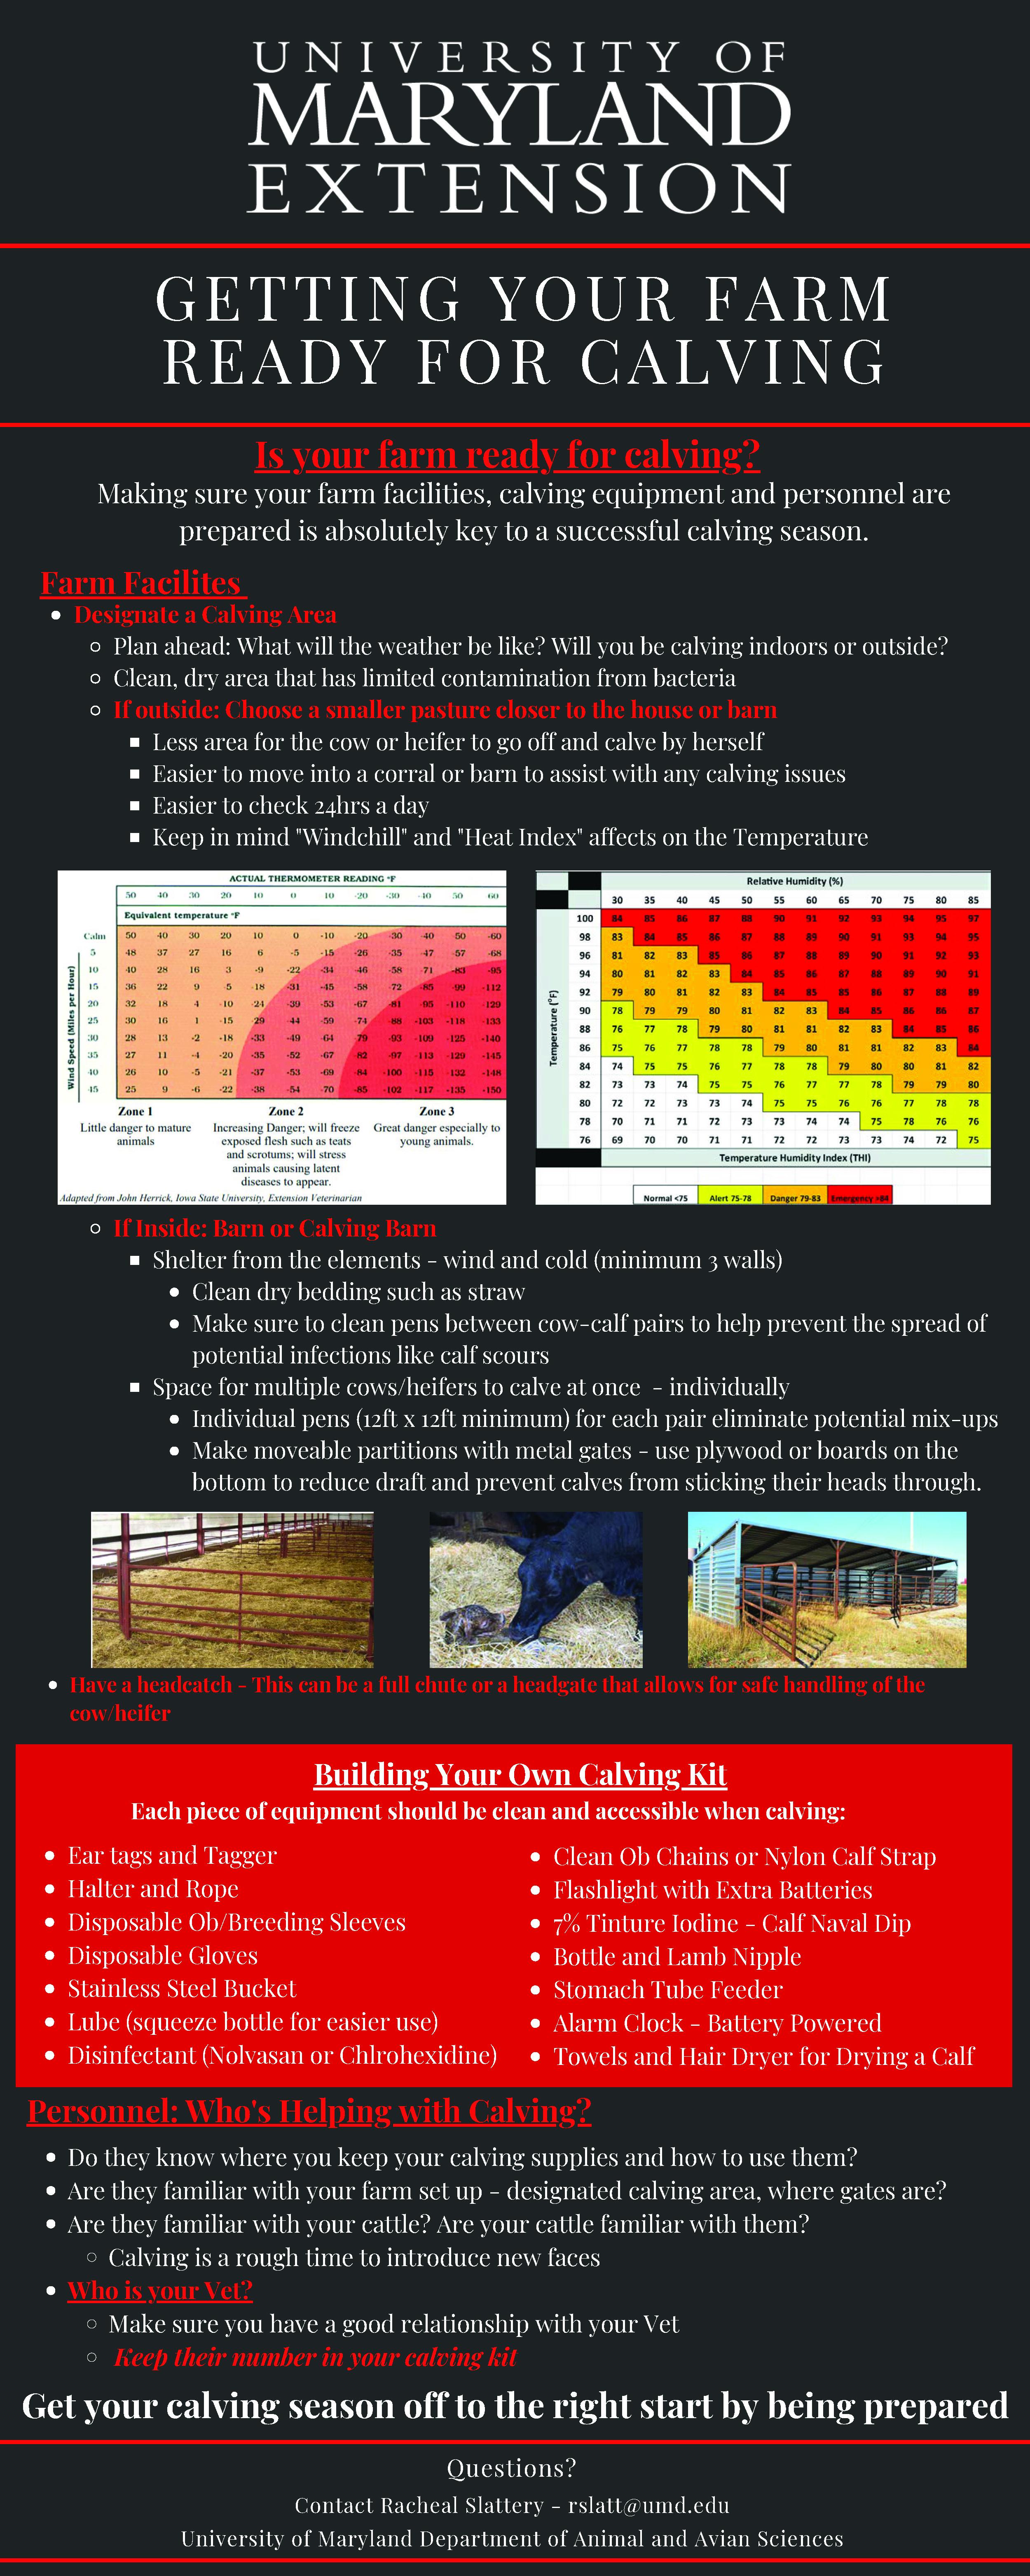 Getting your farm ready for calving infographic